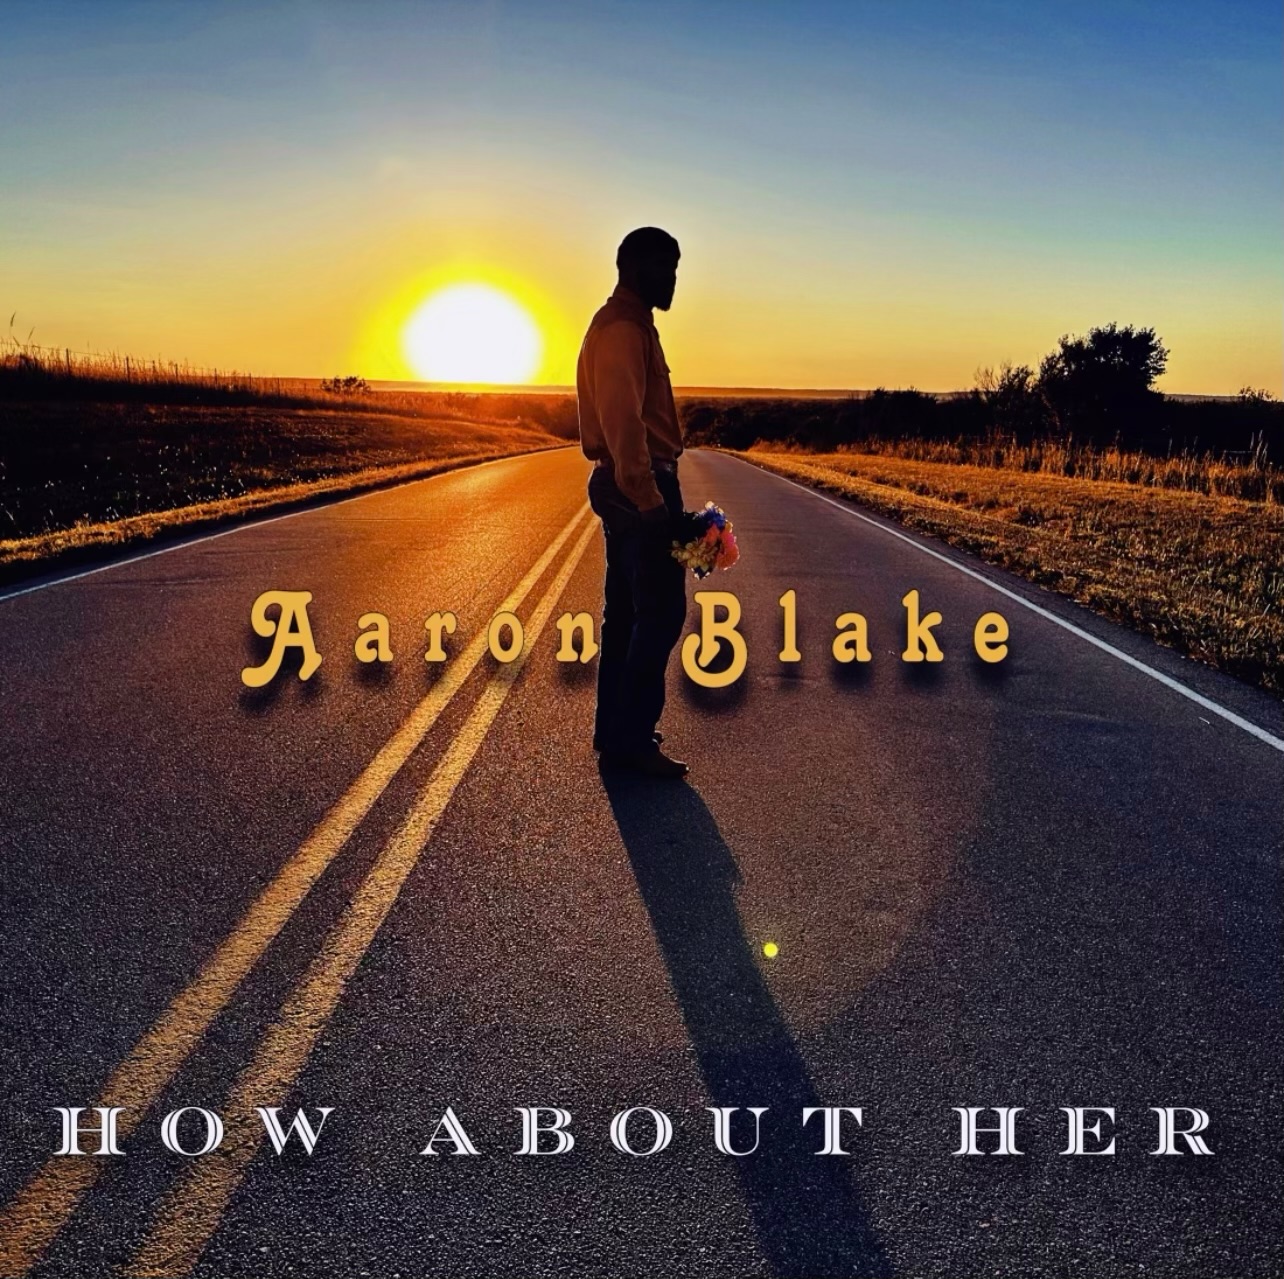 Aaron Blake – “How About Her” (Album)